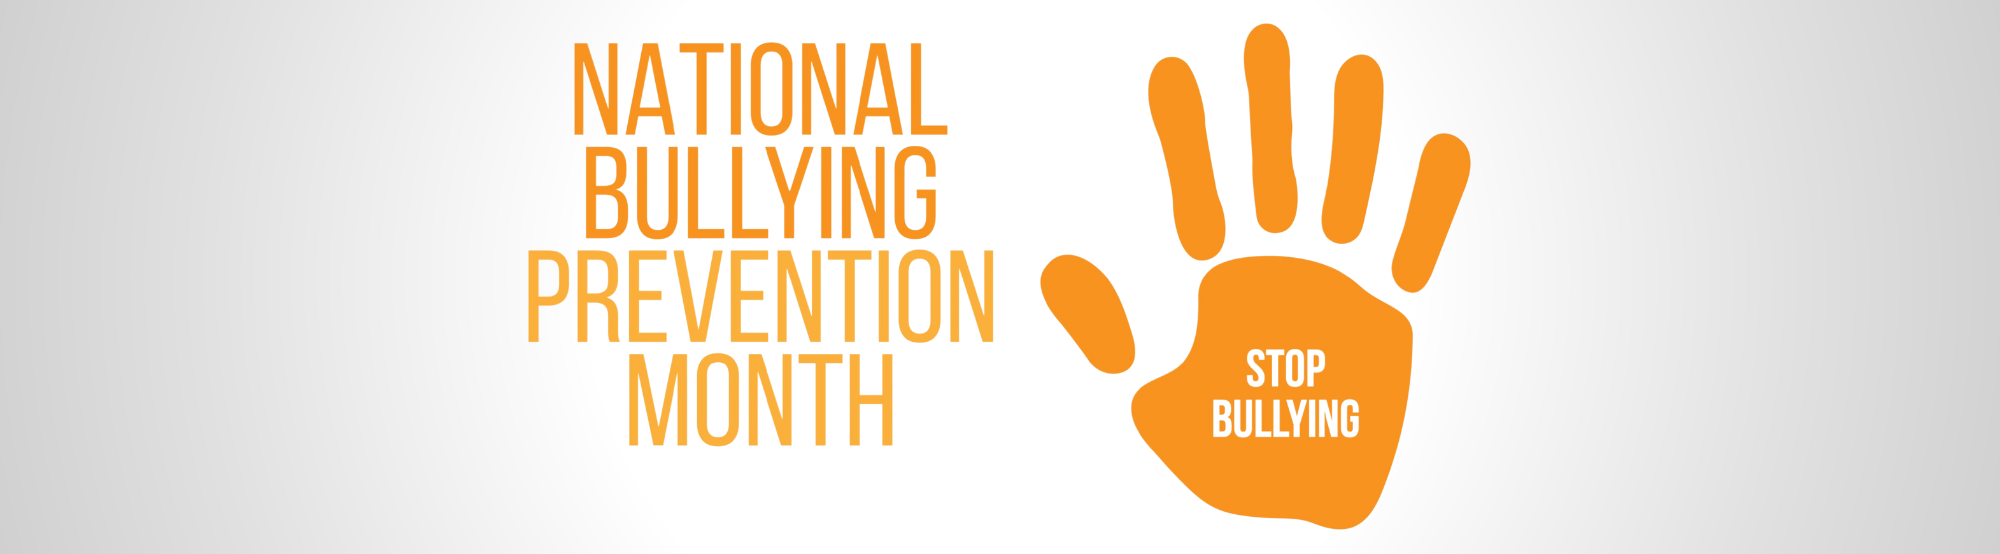 Image of an orange handprint on a white background with the text "Stop Bullying" in the handprint and the text "National Bullying Prevention Month" next to the handpring